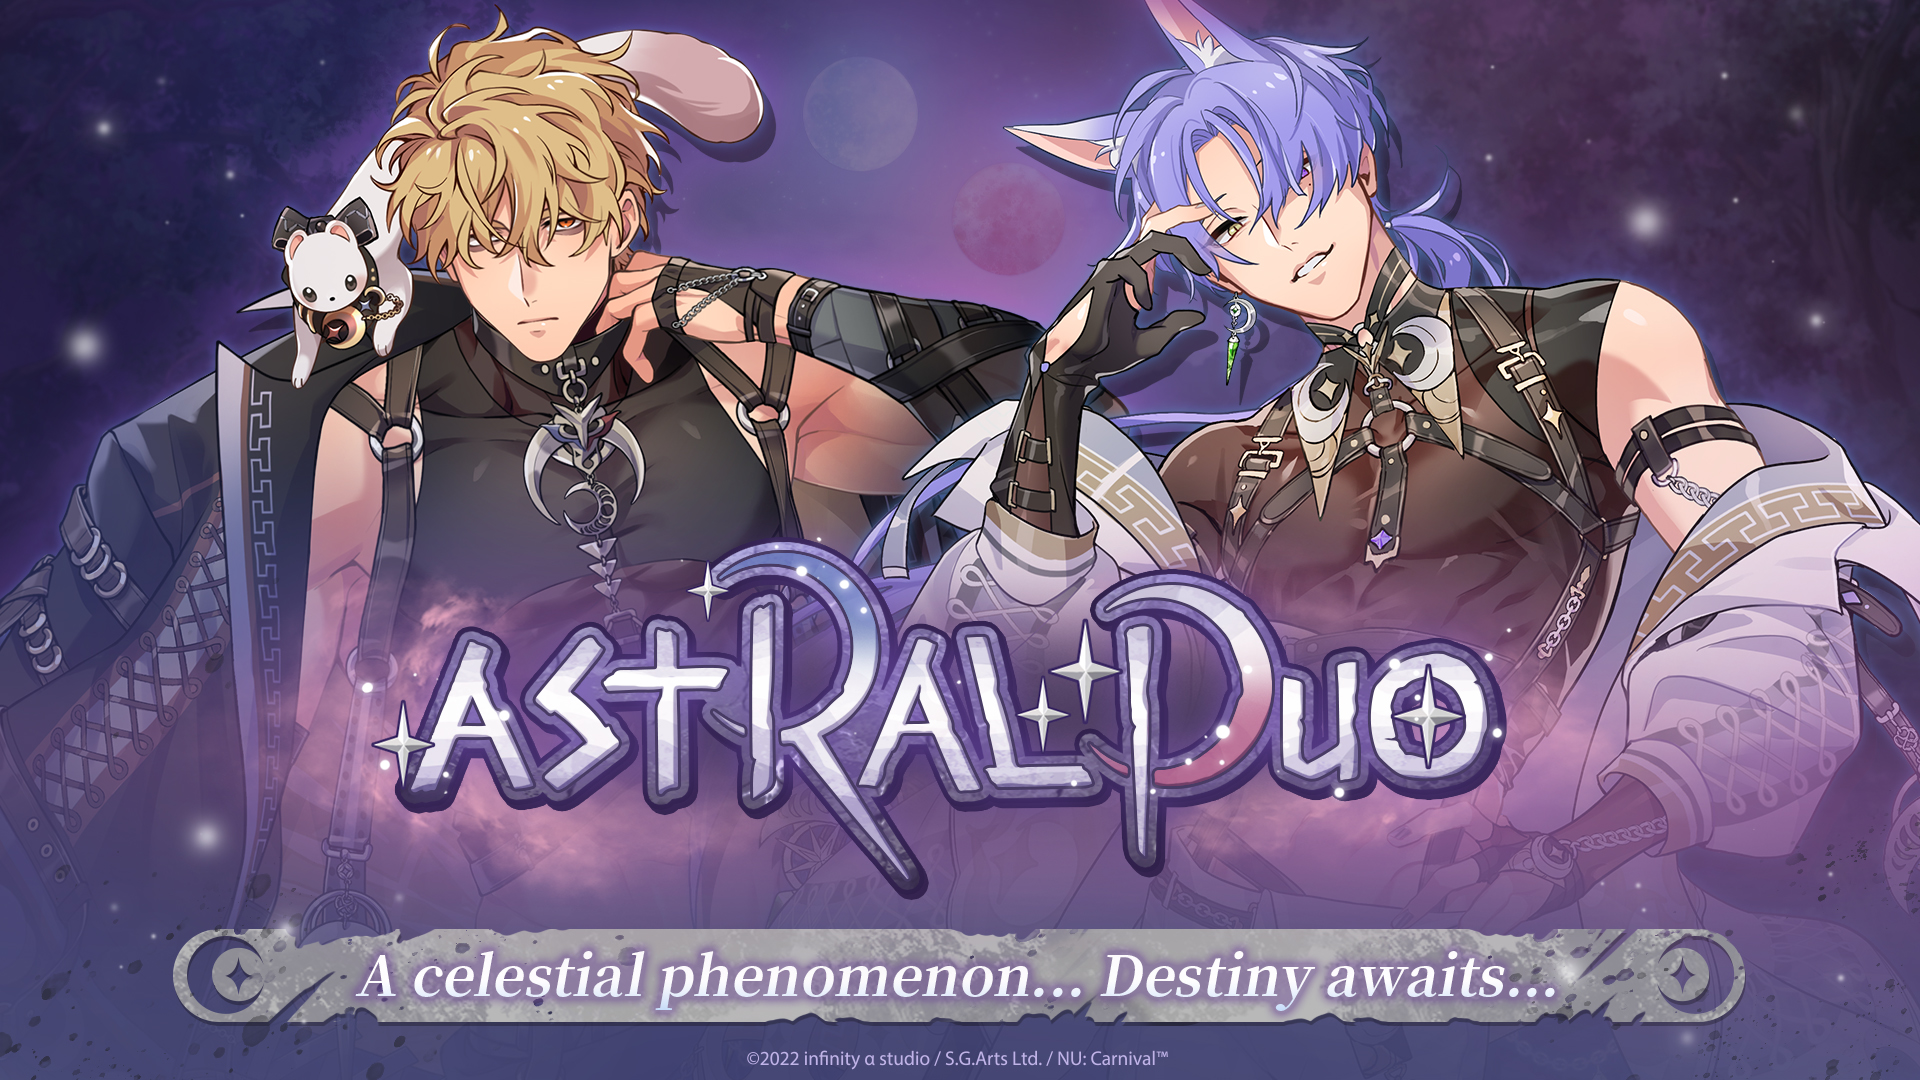 [Astral Duo] Now Playable!